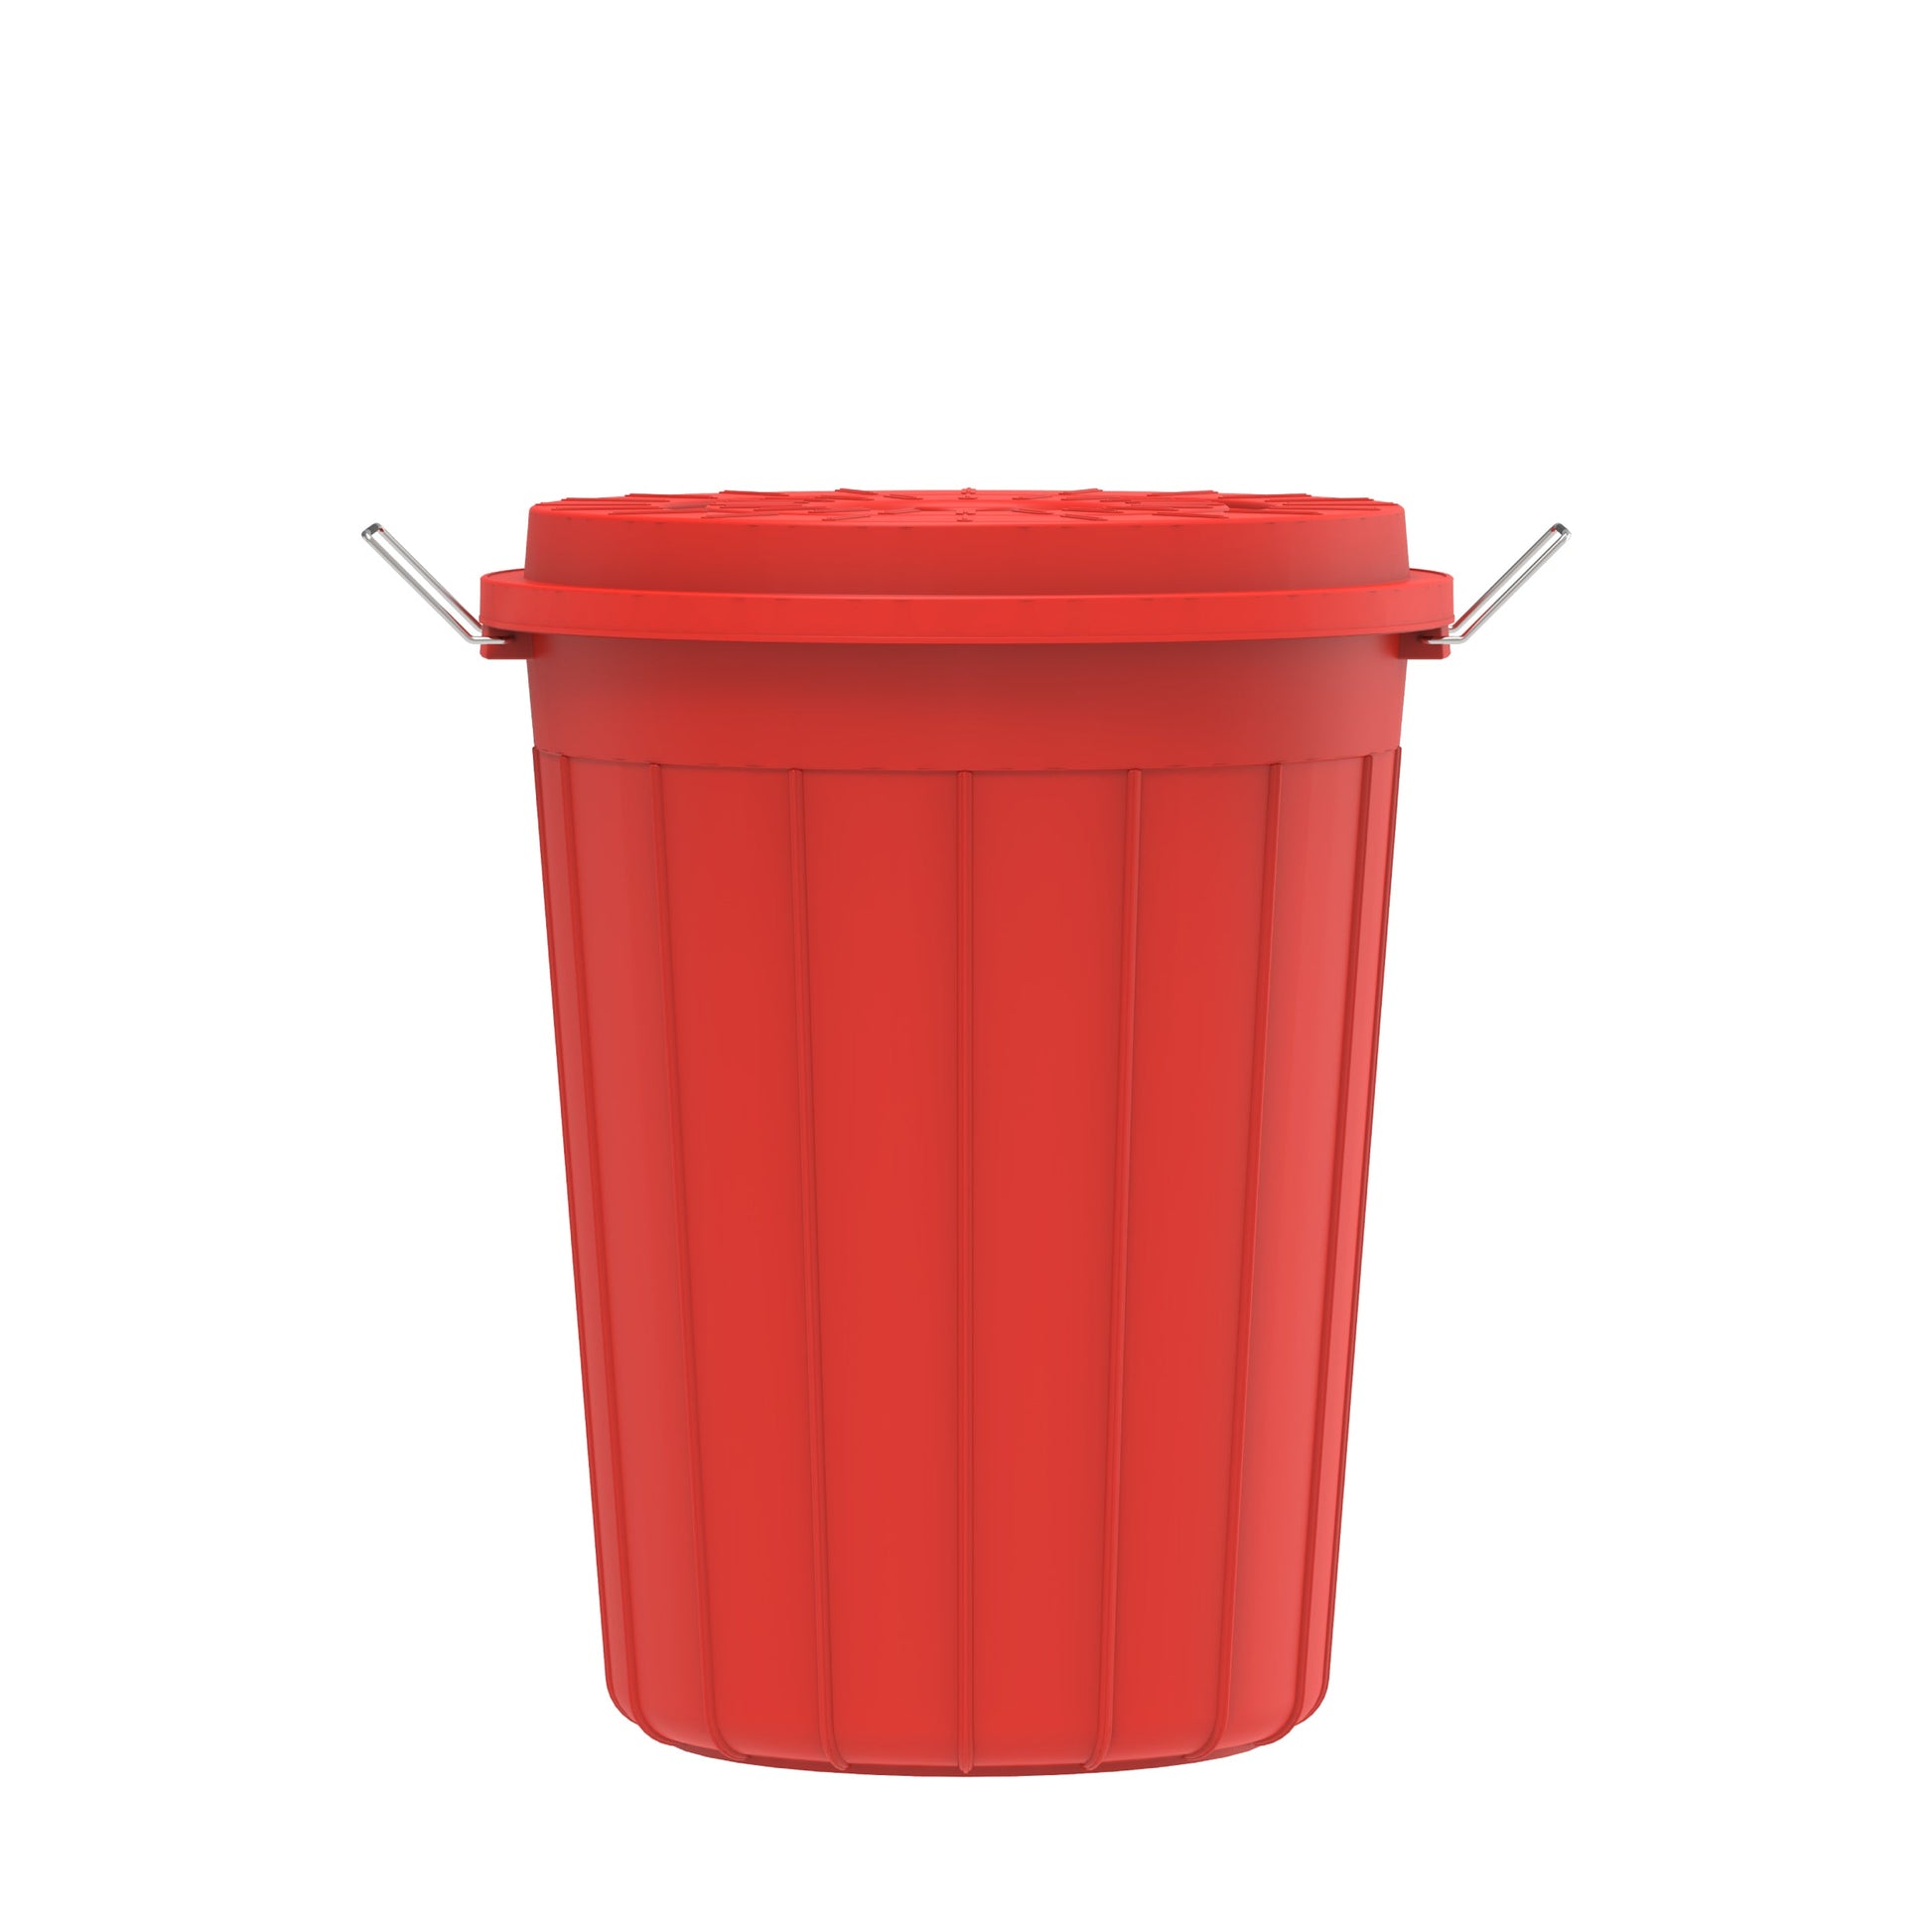 70L Round Plastic Drums with Lid - Cosmoplast Bahrain